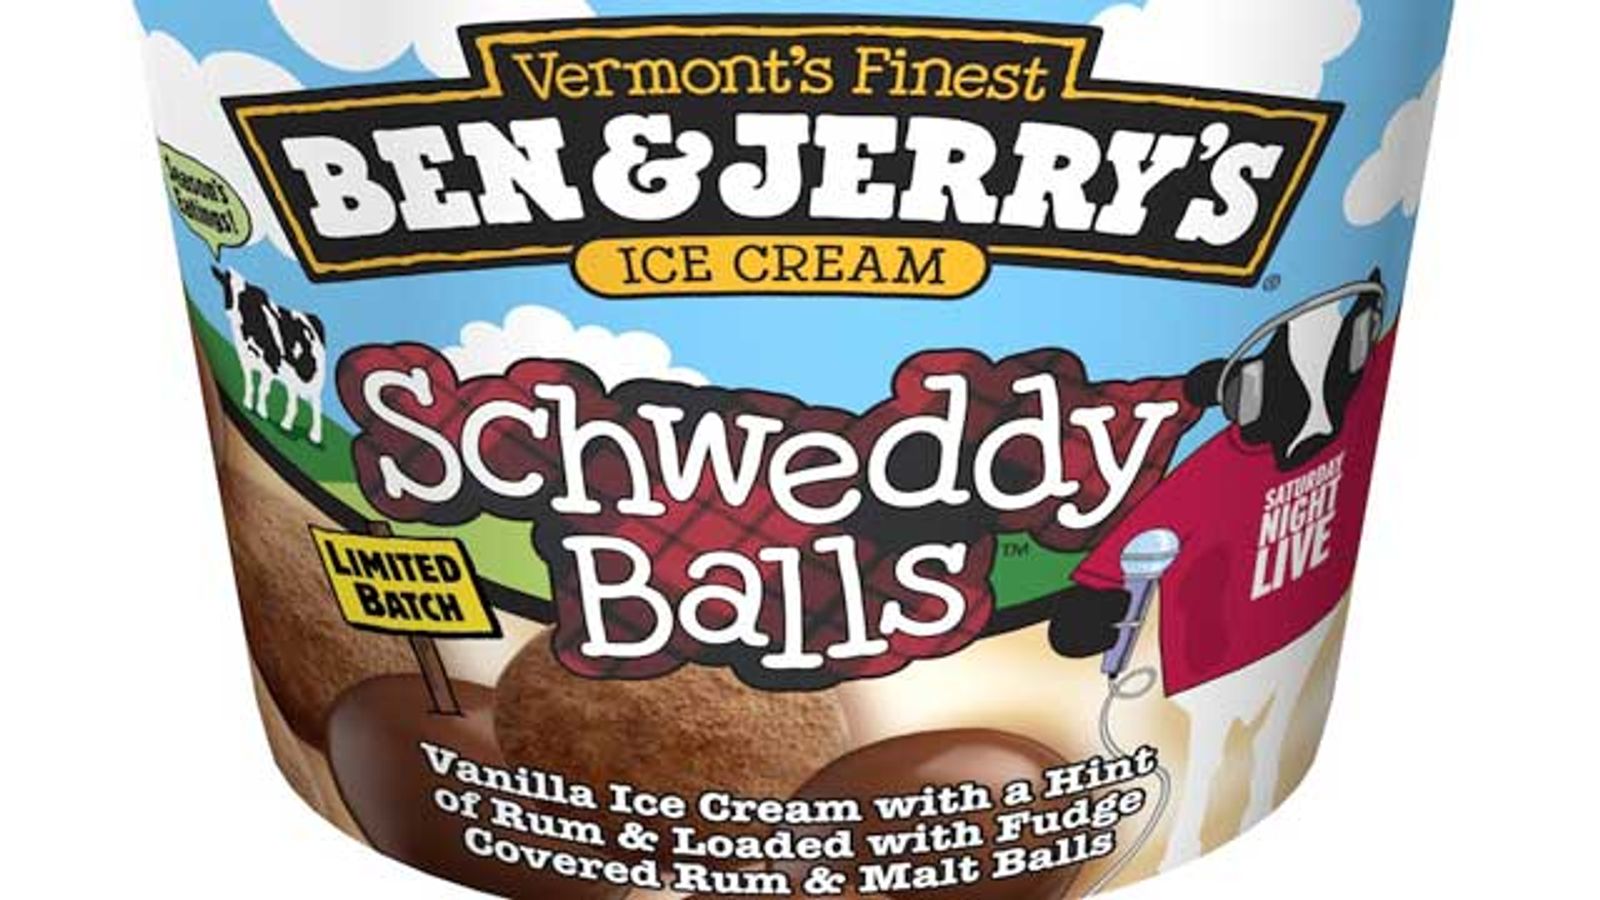 Caballero Video Agrees to Stop Using Ben & Jerry Marks